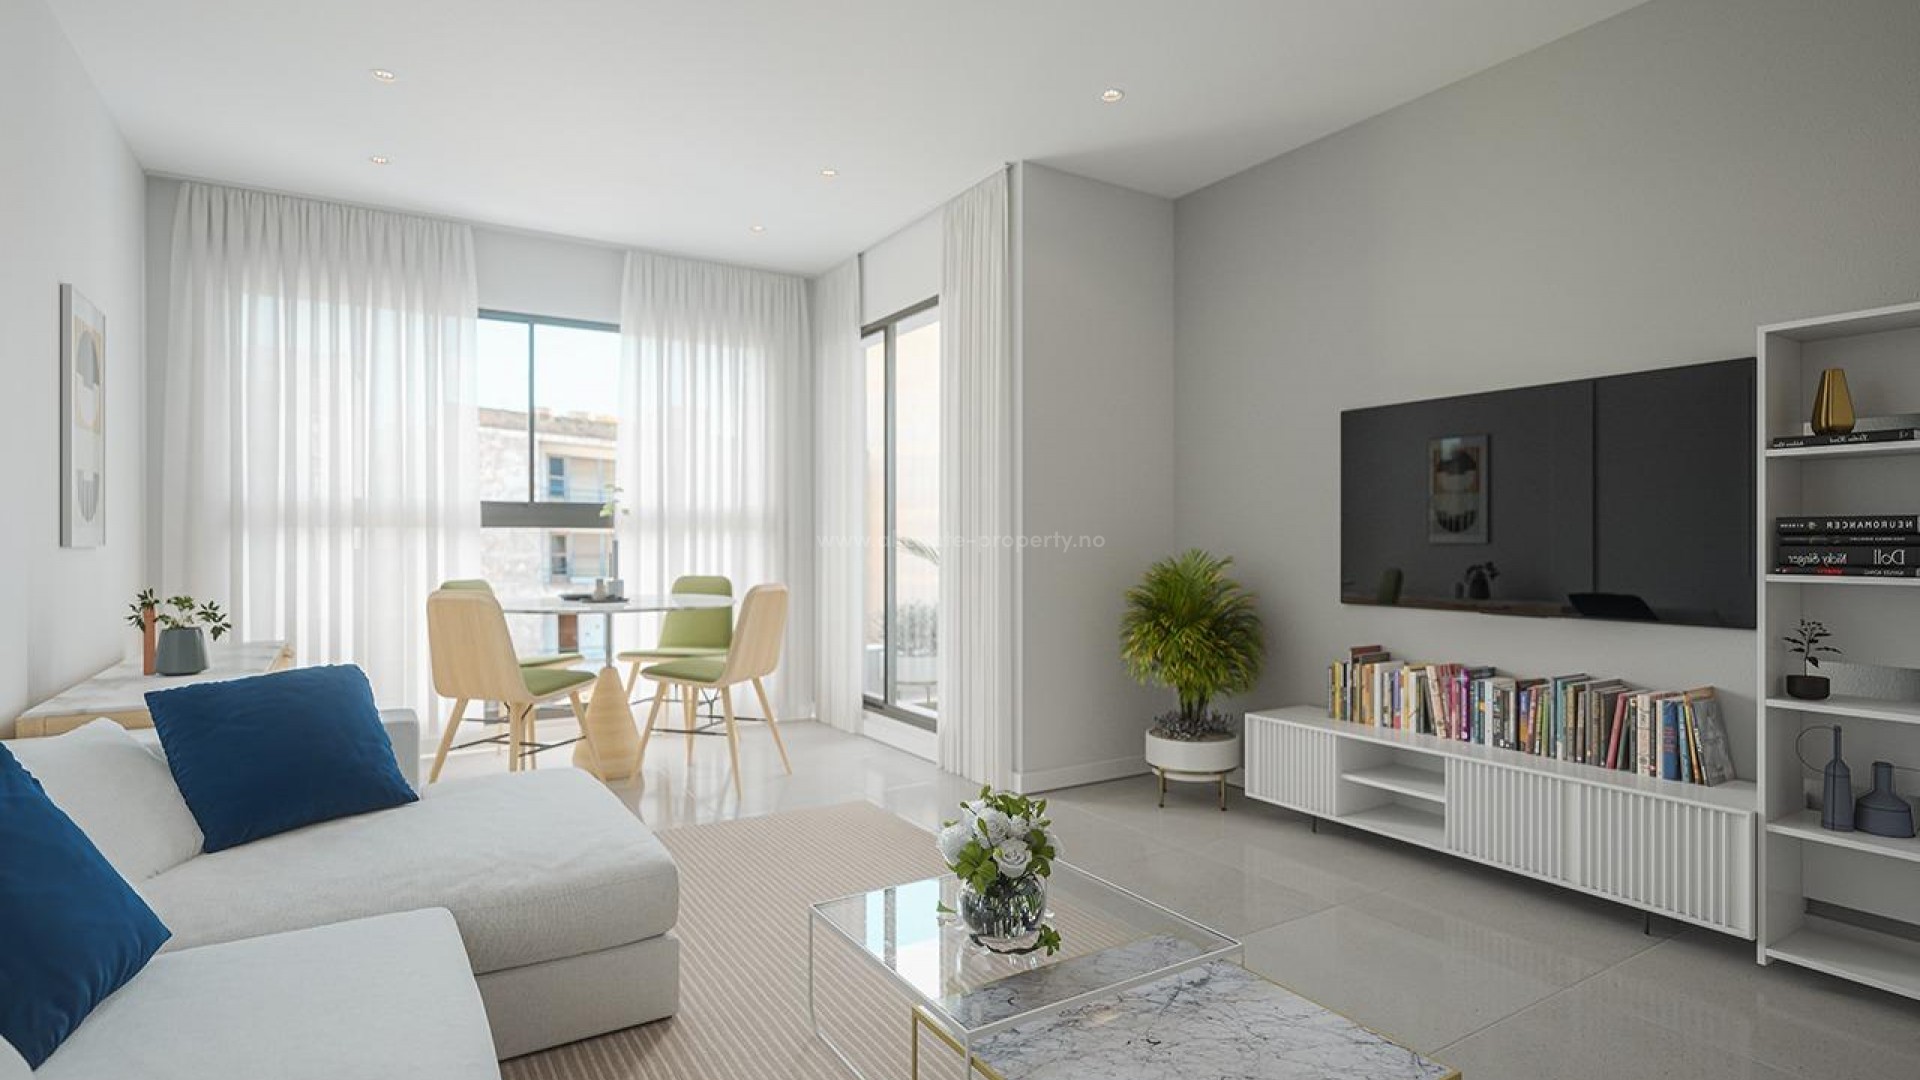 Residential complex with flats/apartments/penthouses in Guardamar del Segura, 2/3 bedrooms, all have an open kitchen with spacious living room, wardrobes, terrace